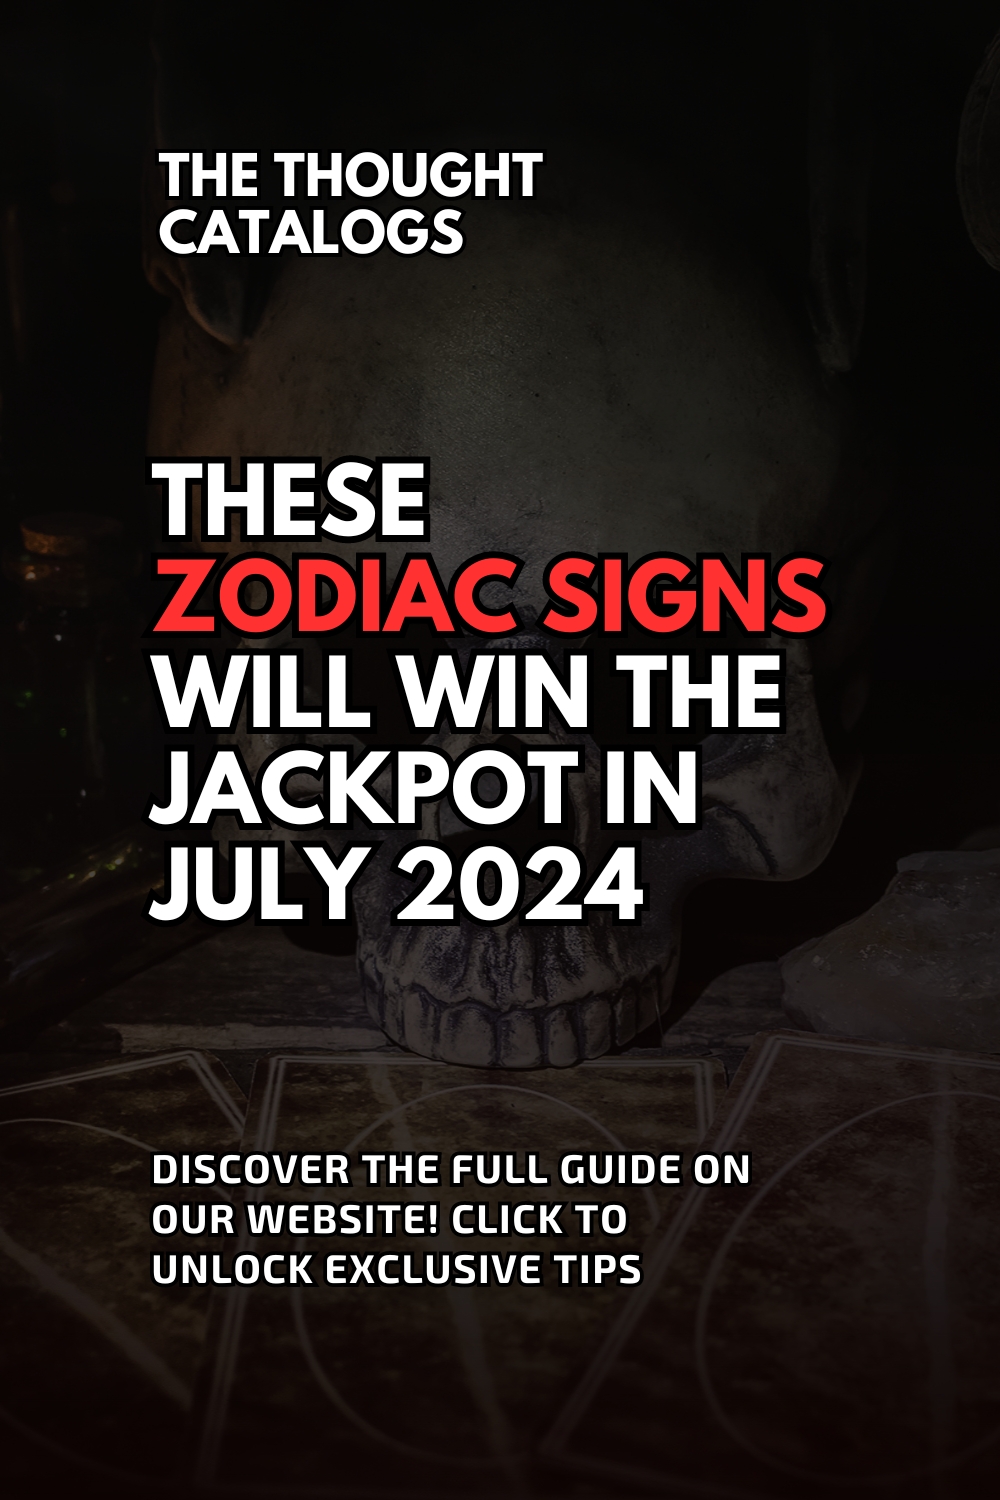 These Zodiac Signs Will Win The Jackpot In July 2024